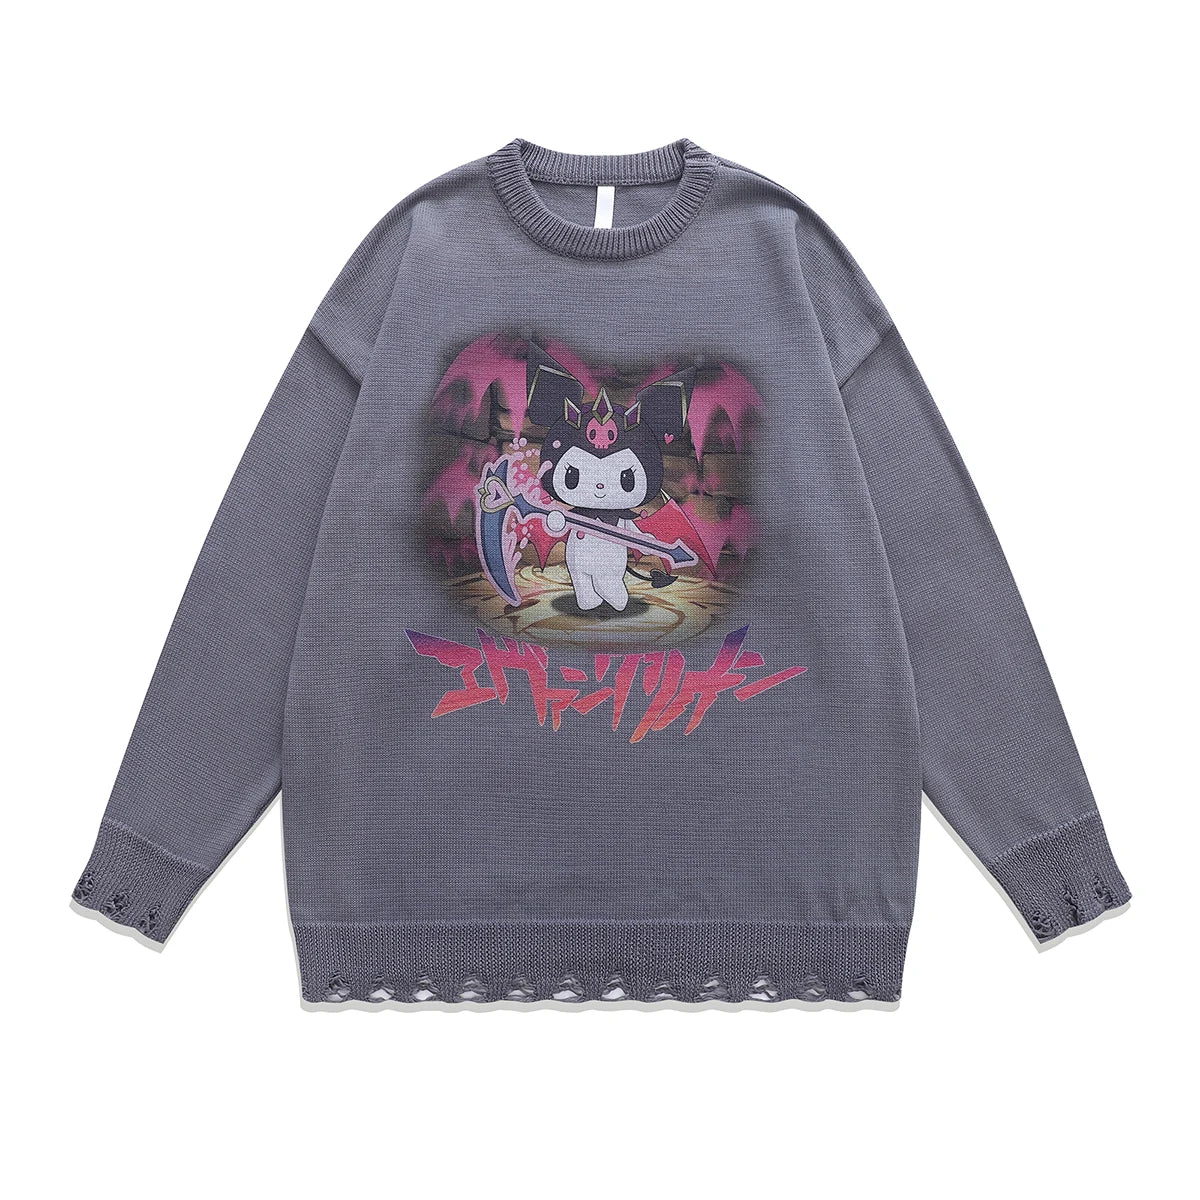 Anime New Jeans Sweater Grey 4